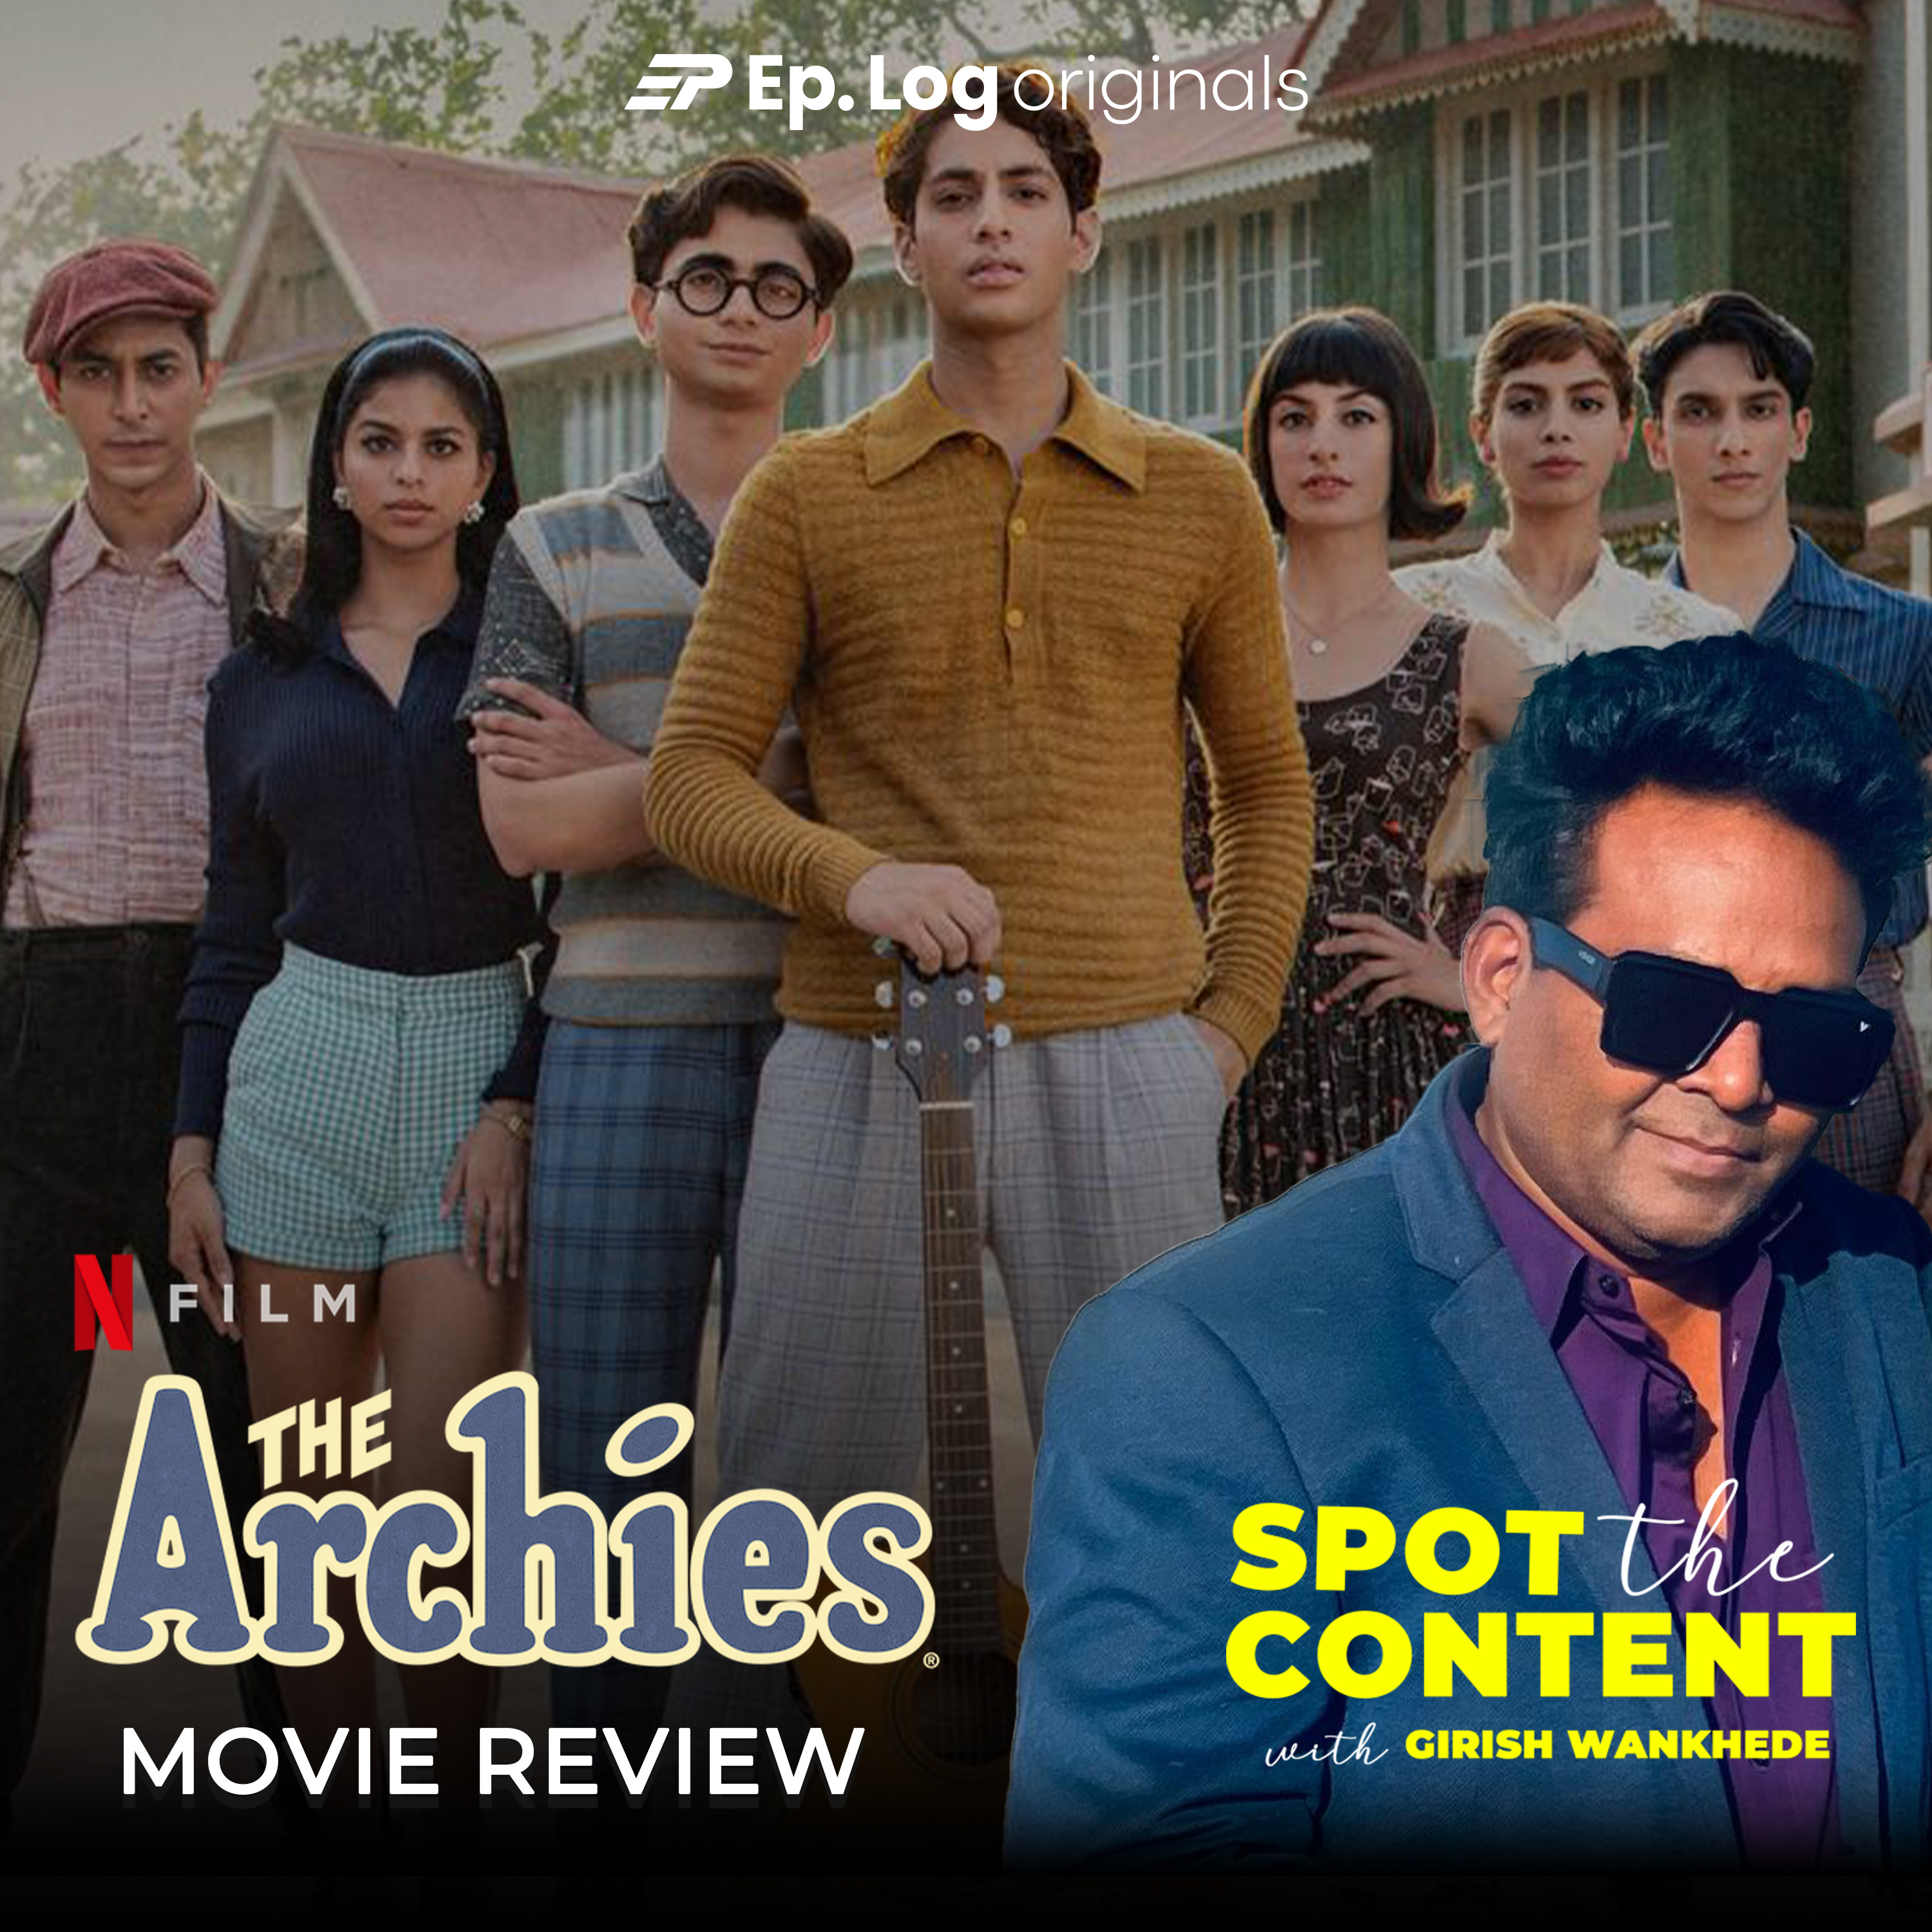 REVIEW: Why The Archies Is A Must-Watch!